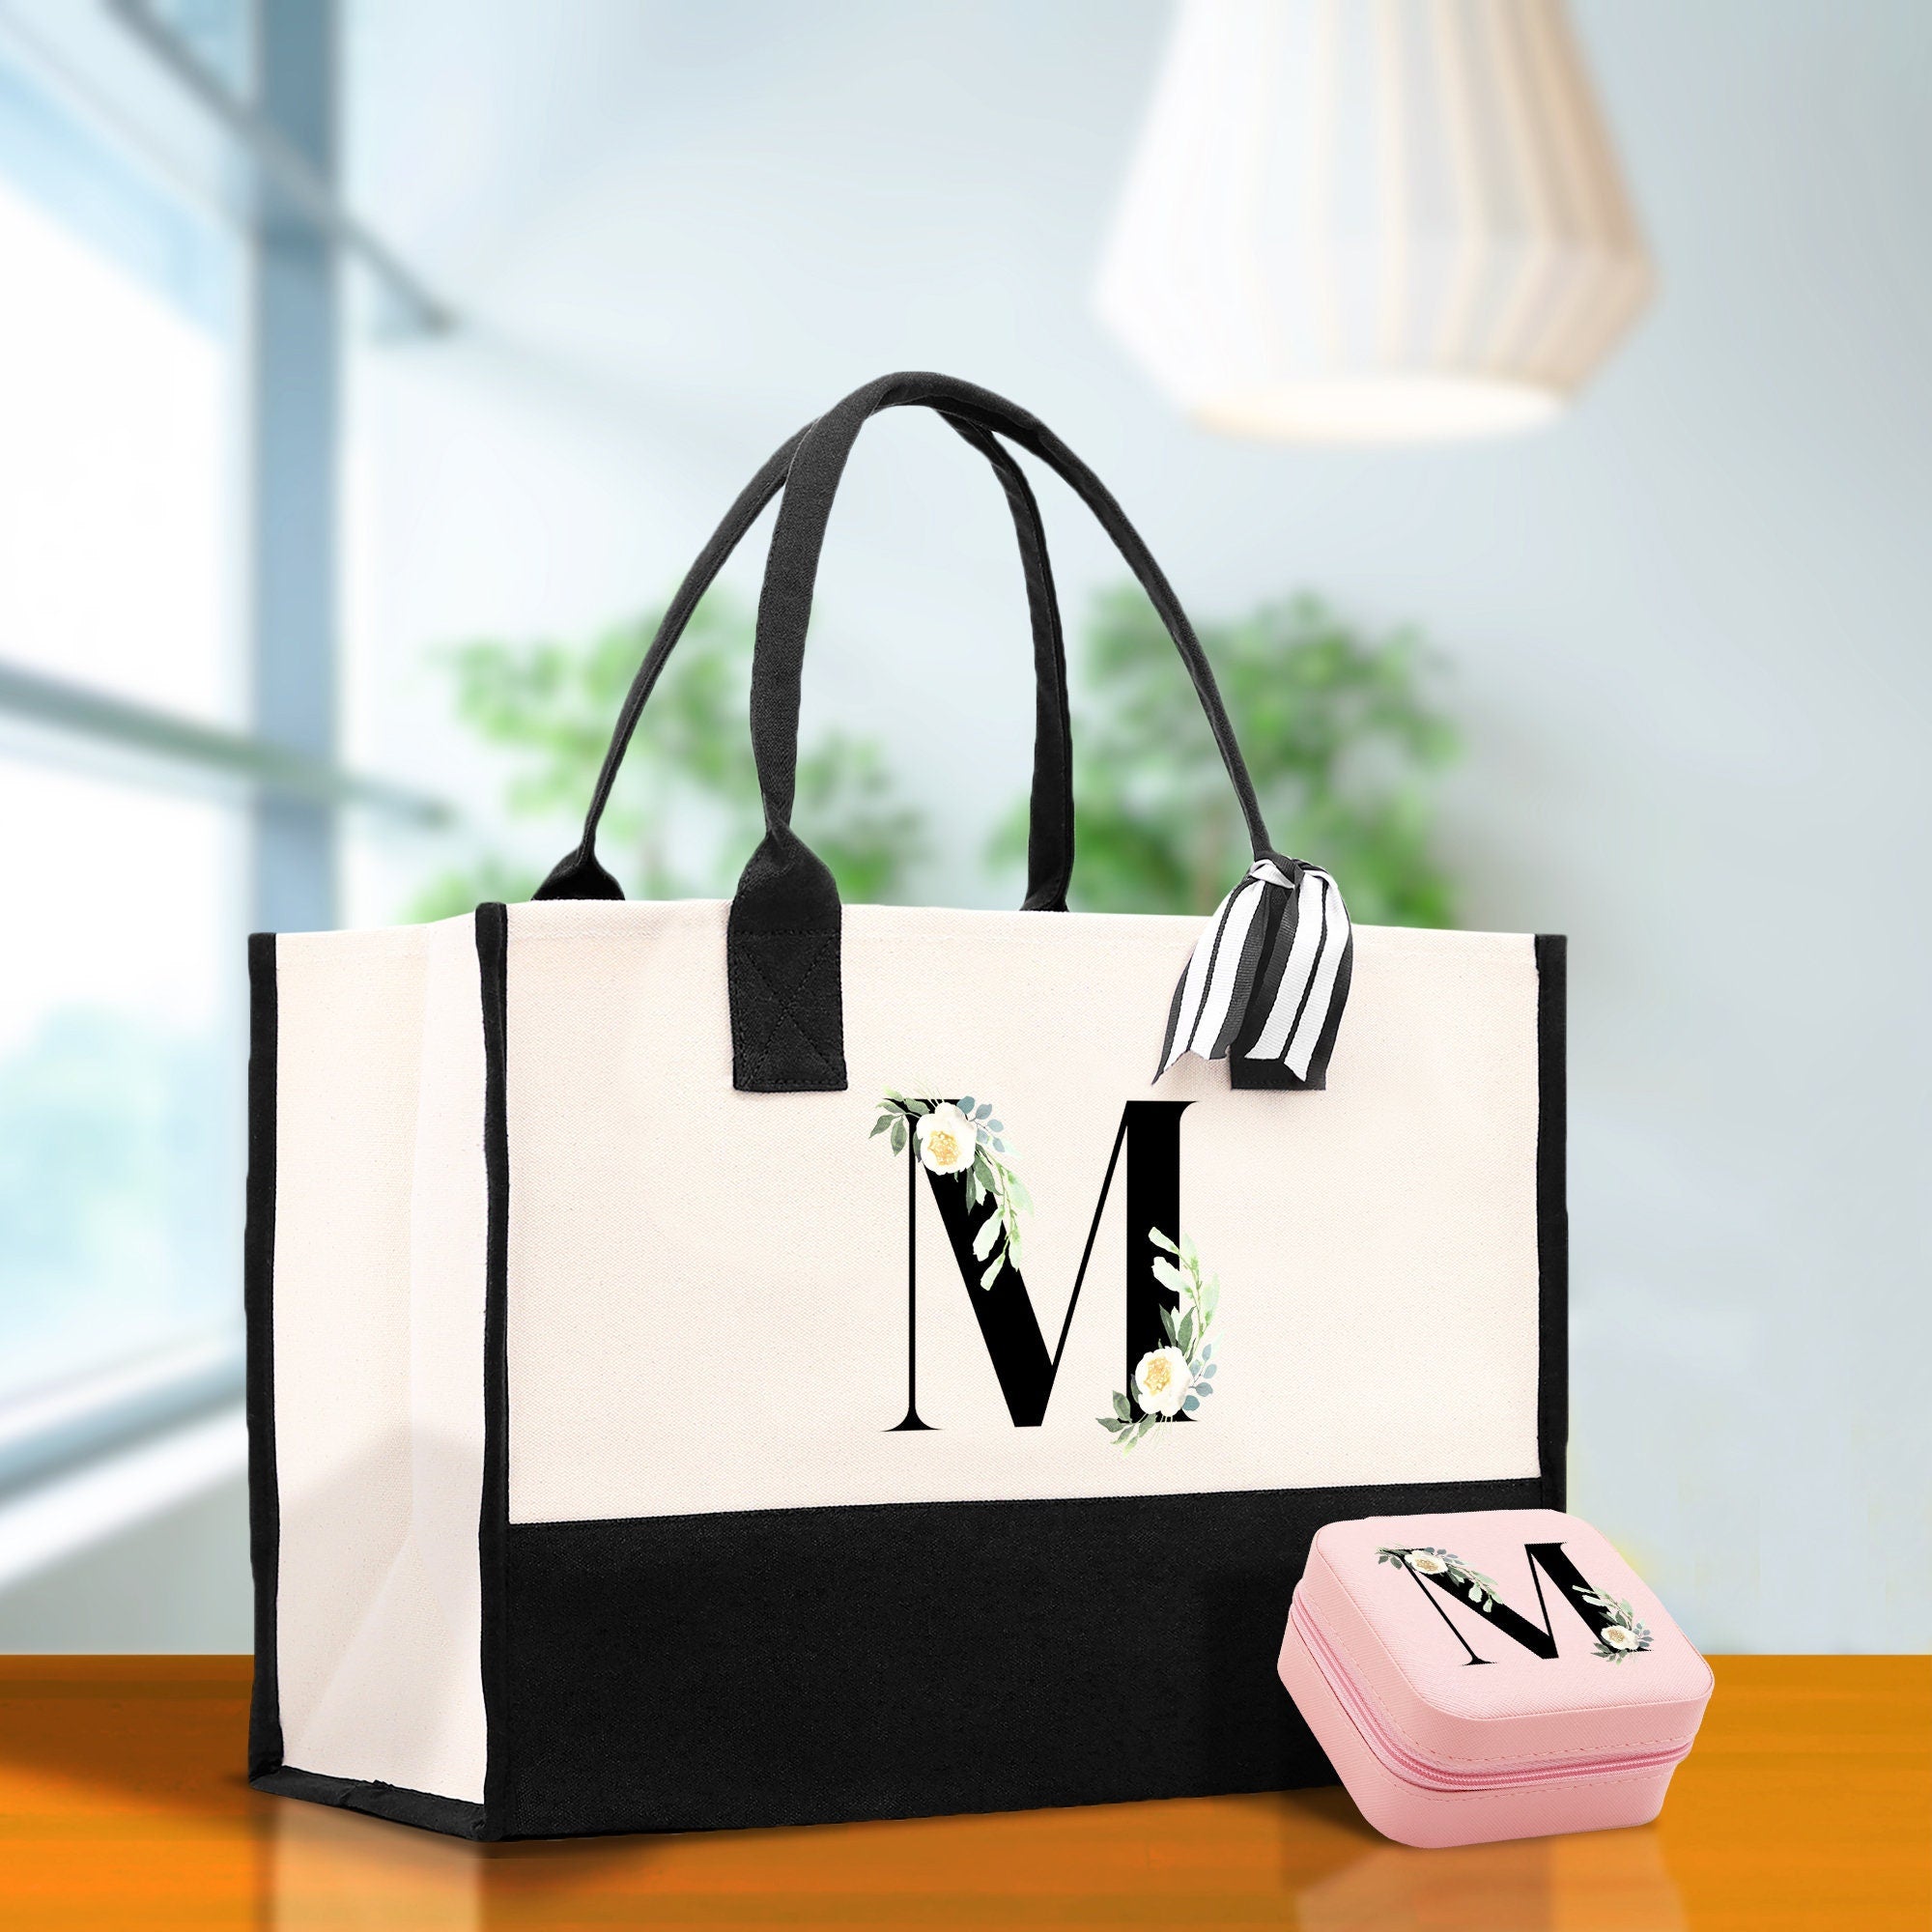 a white and black bag and a pink box on a table